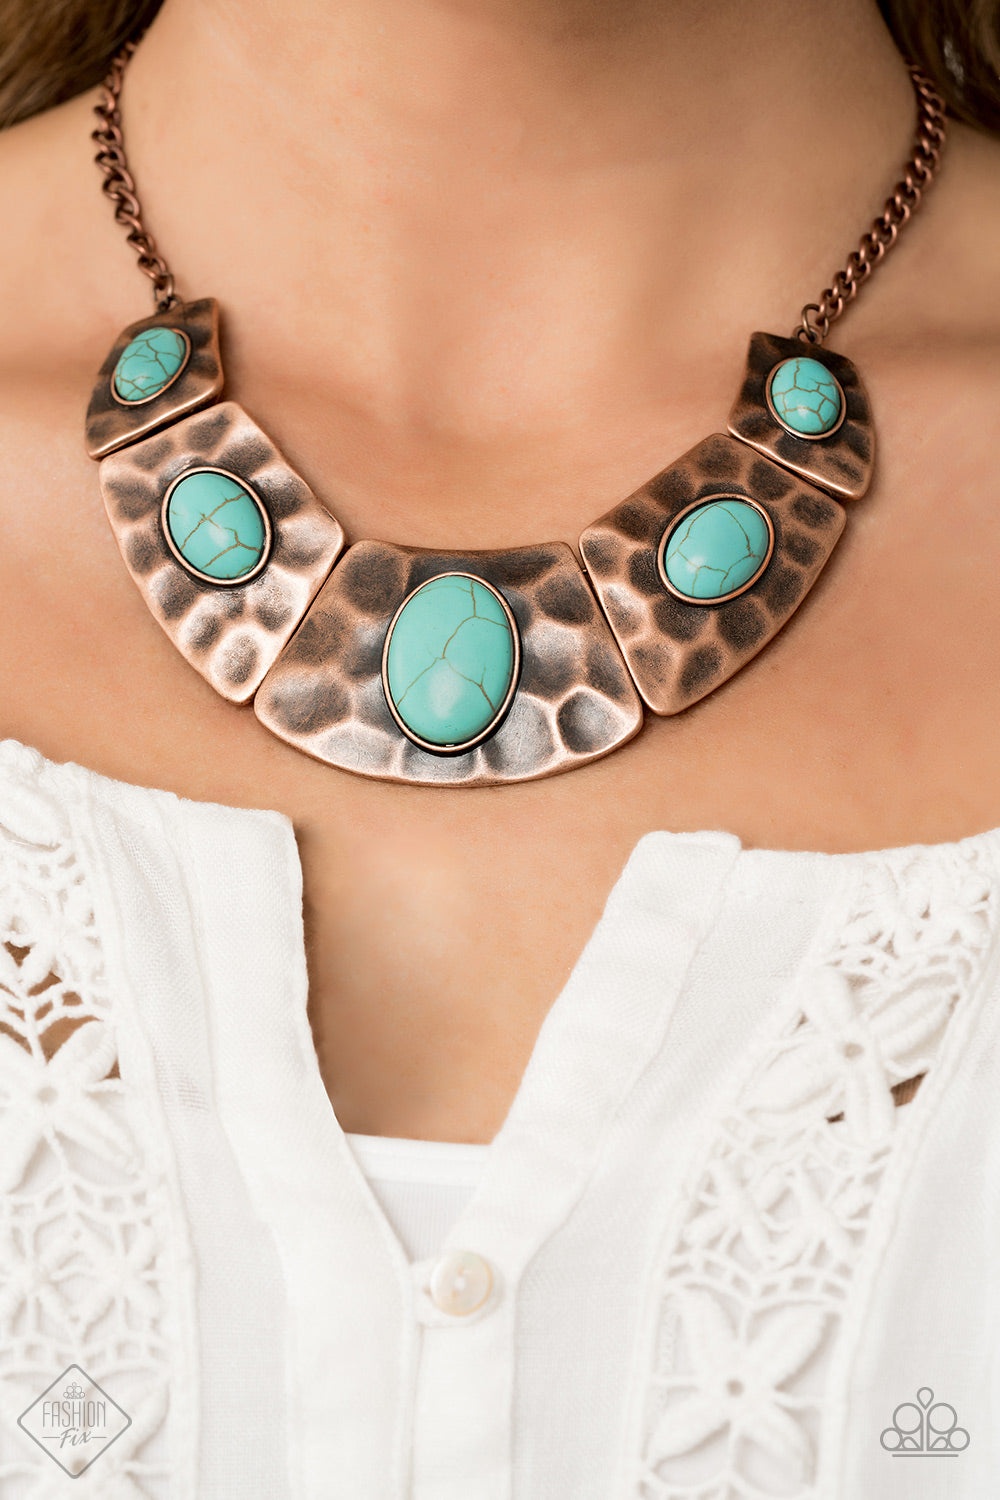 RULER IN FAVOR - COPPER BLUE TURQUOISE CRESCENT NECKLACE